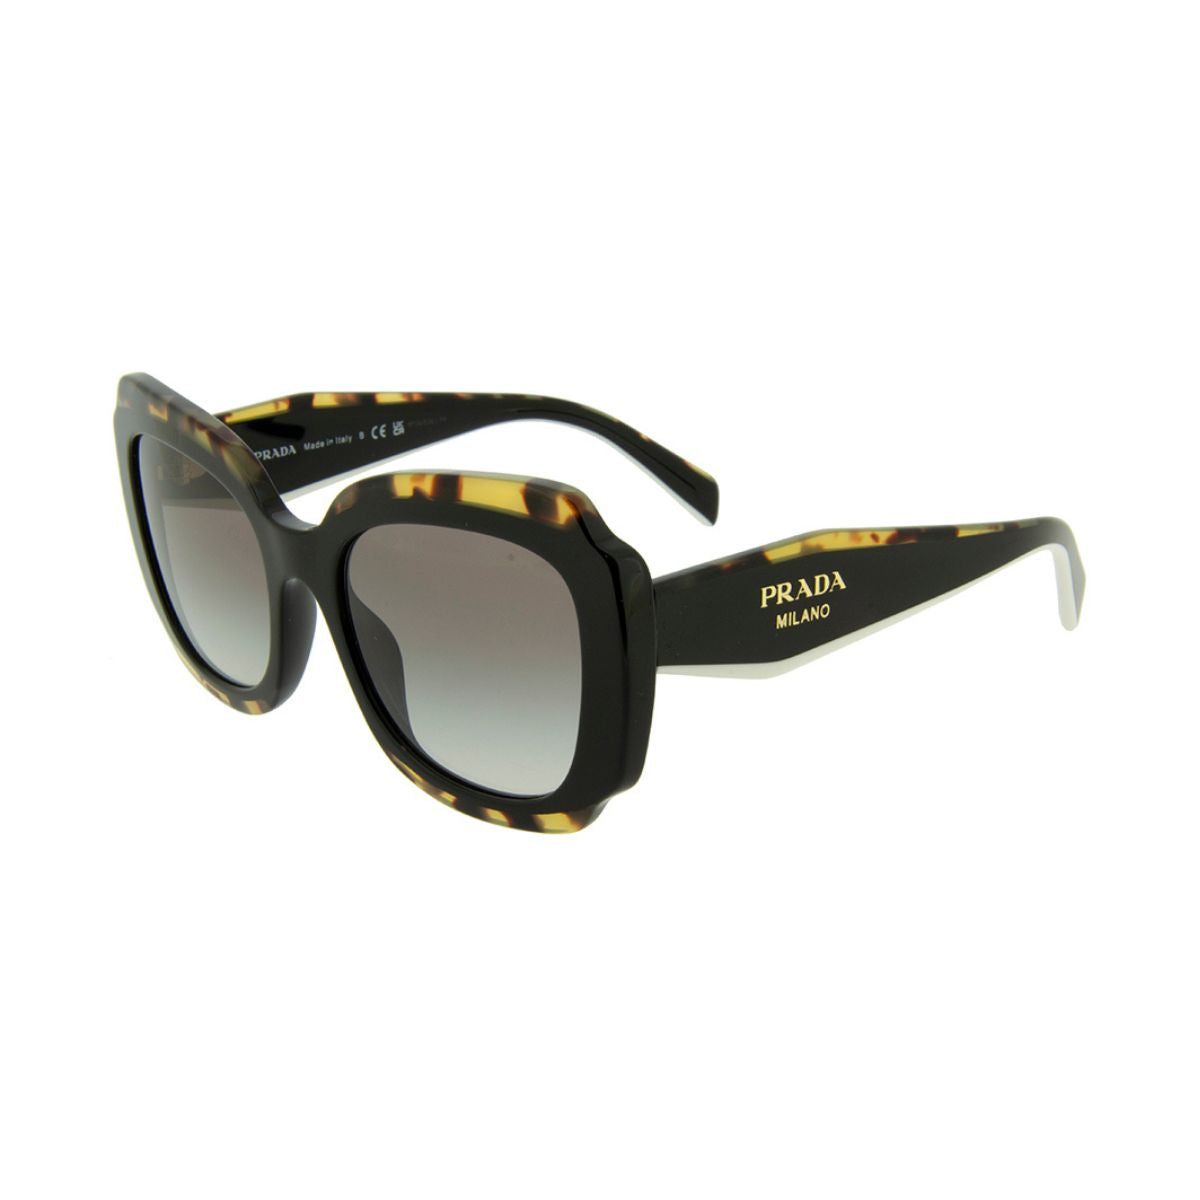 "Shop now at Optorium for Prada SPR16Y 01M-OA7 sunglasses, featuring a trendy block design in cool grey and a flattering butterfly shape, ideal for women seeking fashionable eyewear."